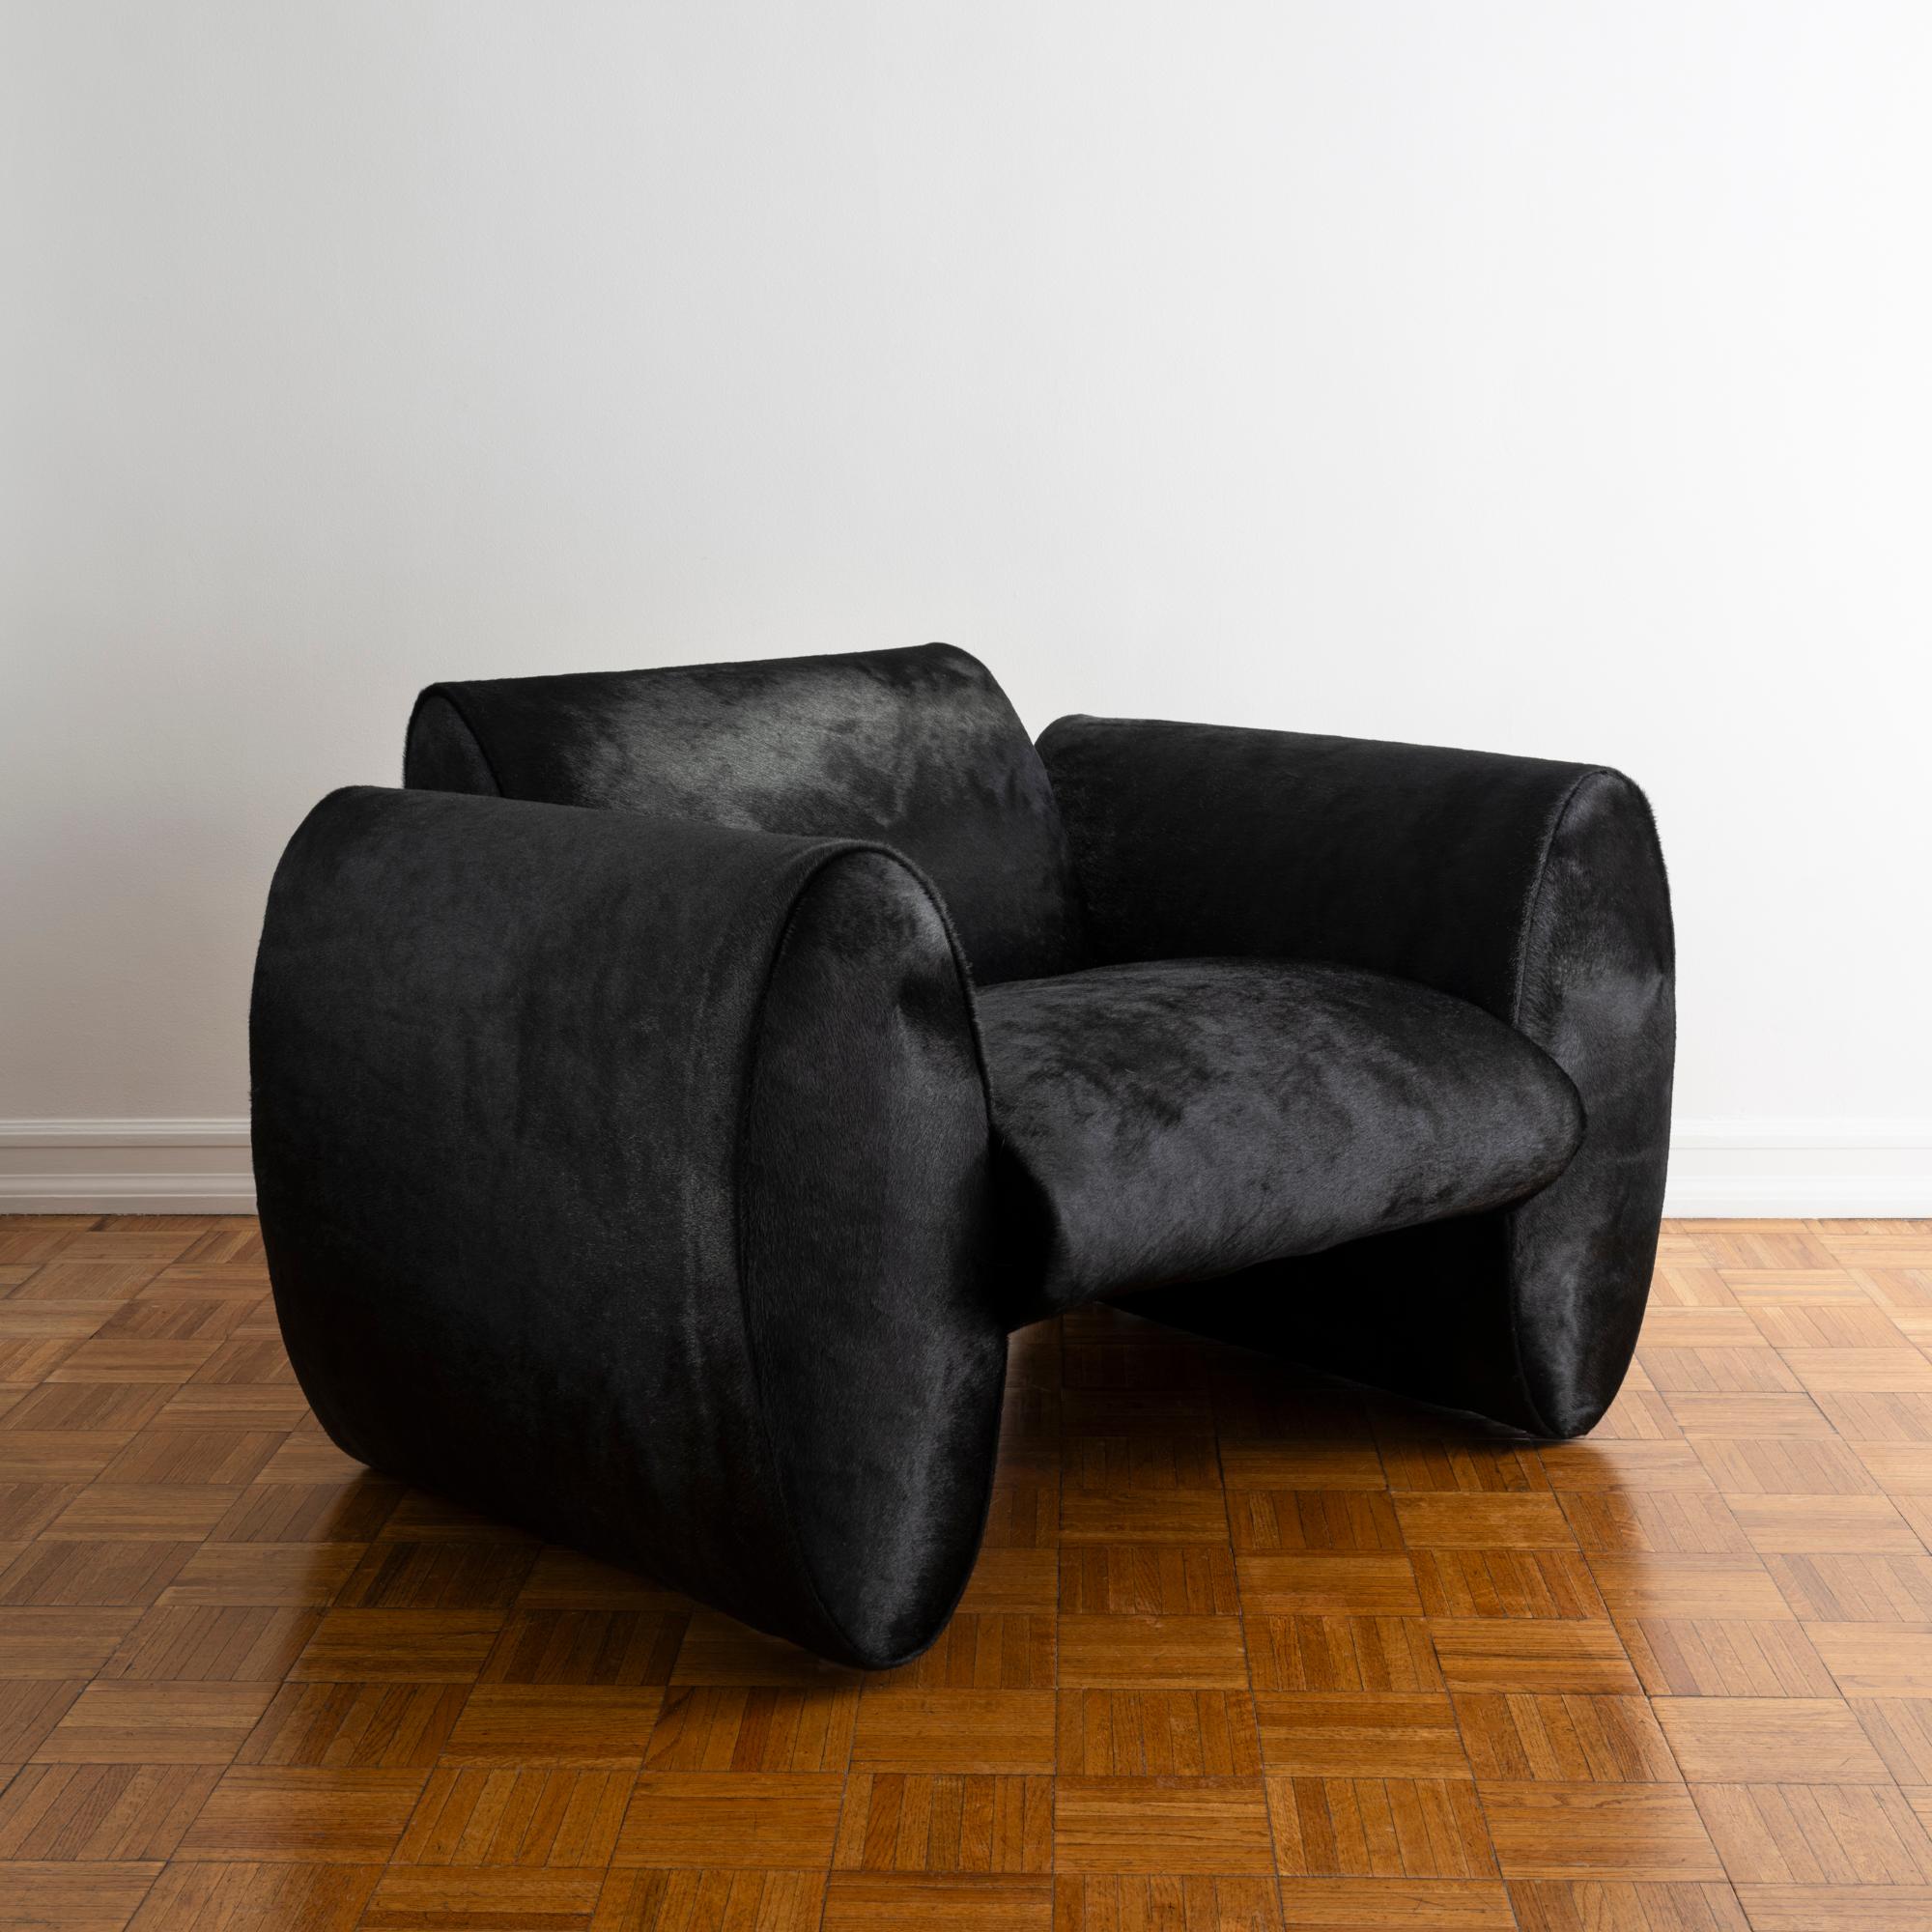 British Upholstered Armchair or Club Chair in Black Hair-on-Hide Designed by EJR Barnes For Sale